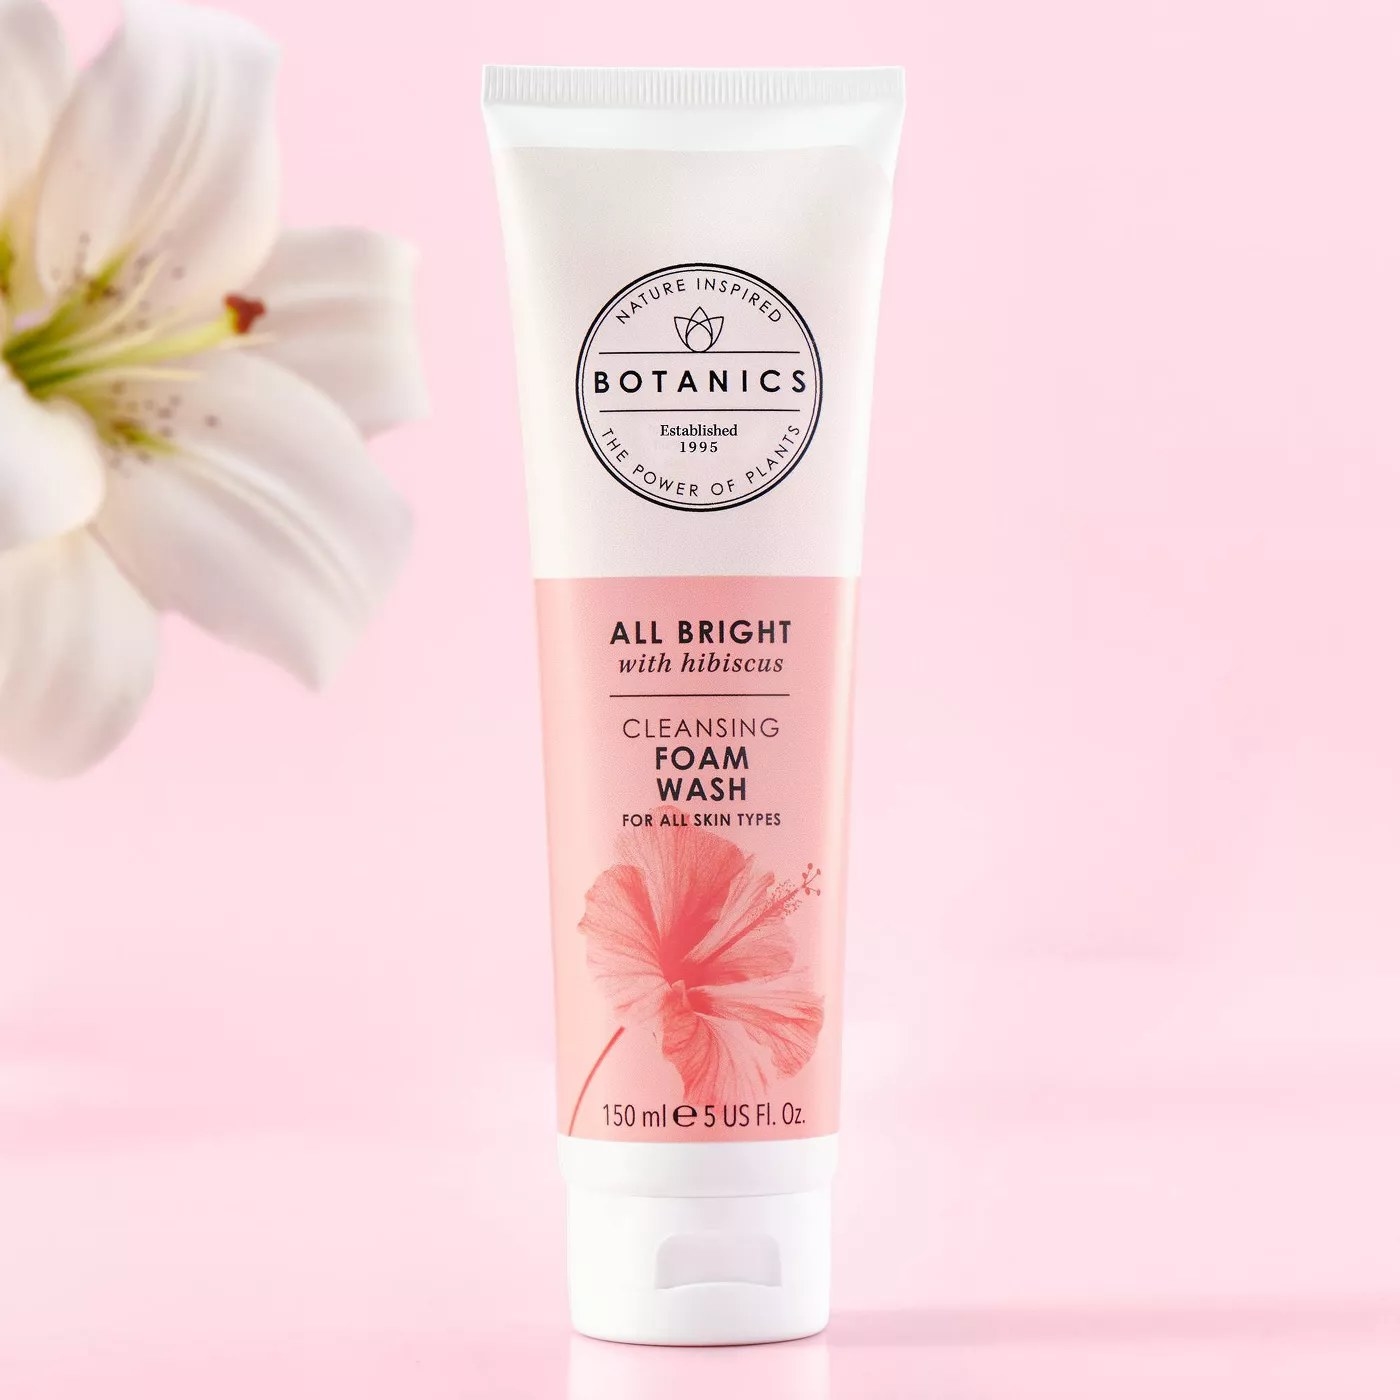 Botanics cleansing foam wash for all skin types with all bright with hibiscus scent